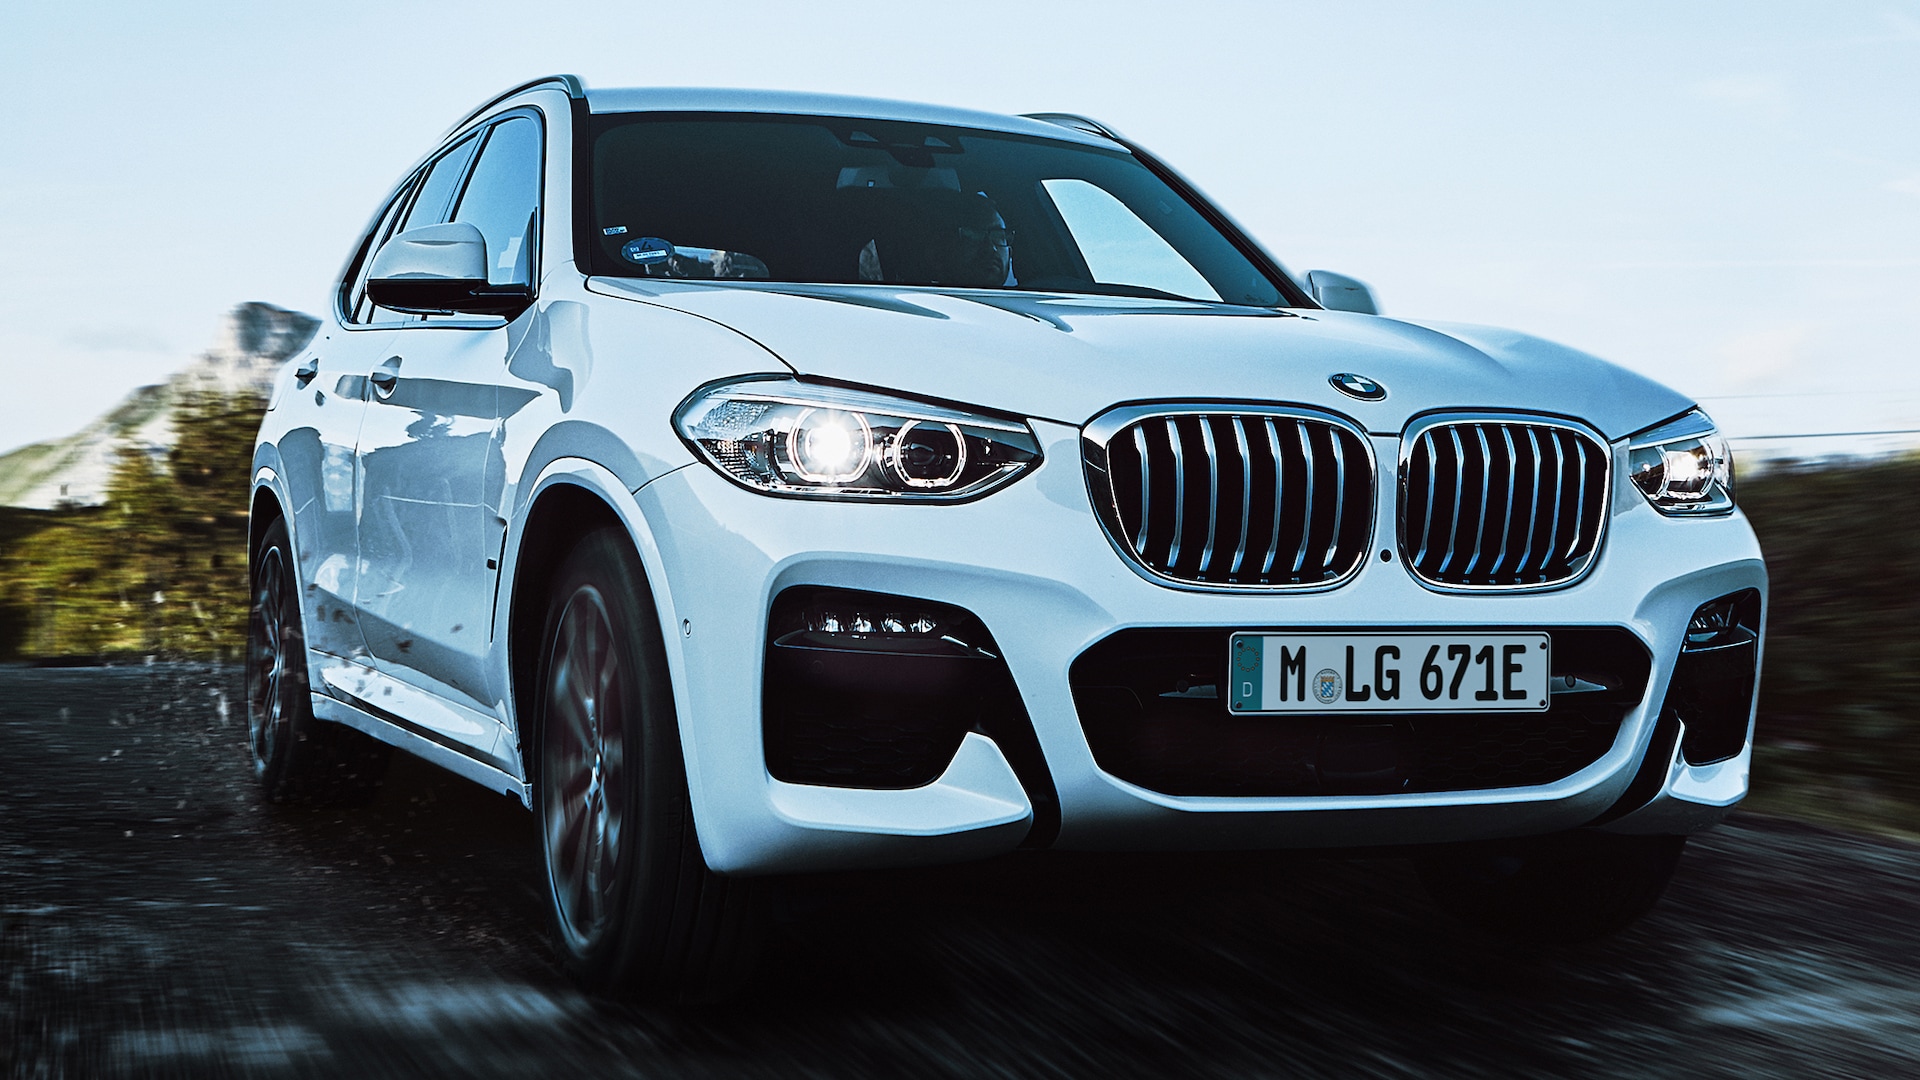 2021 BMW X3 Prices, Reviews, and Photos - MotorTrend